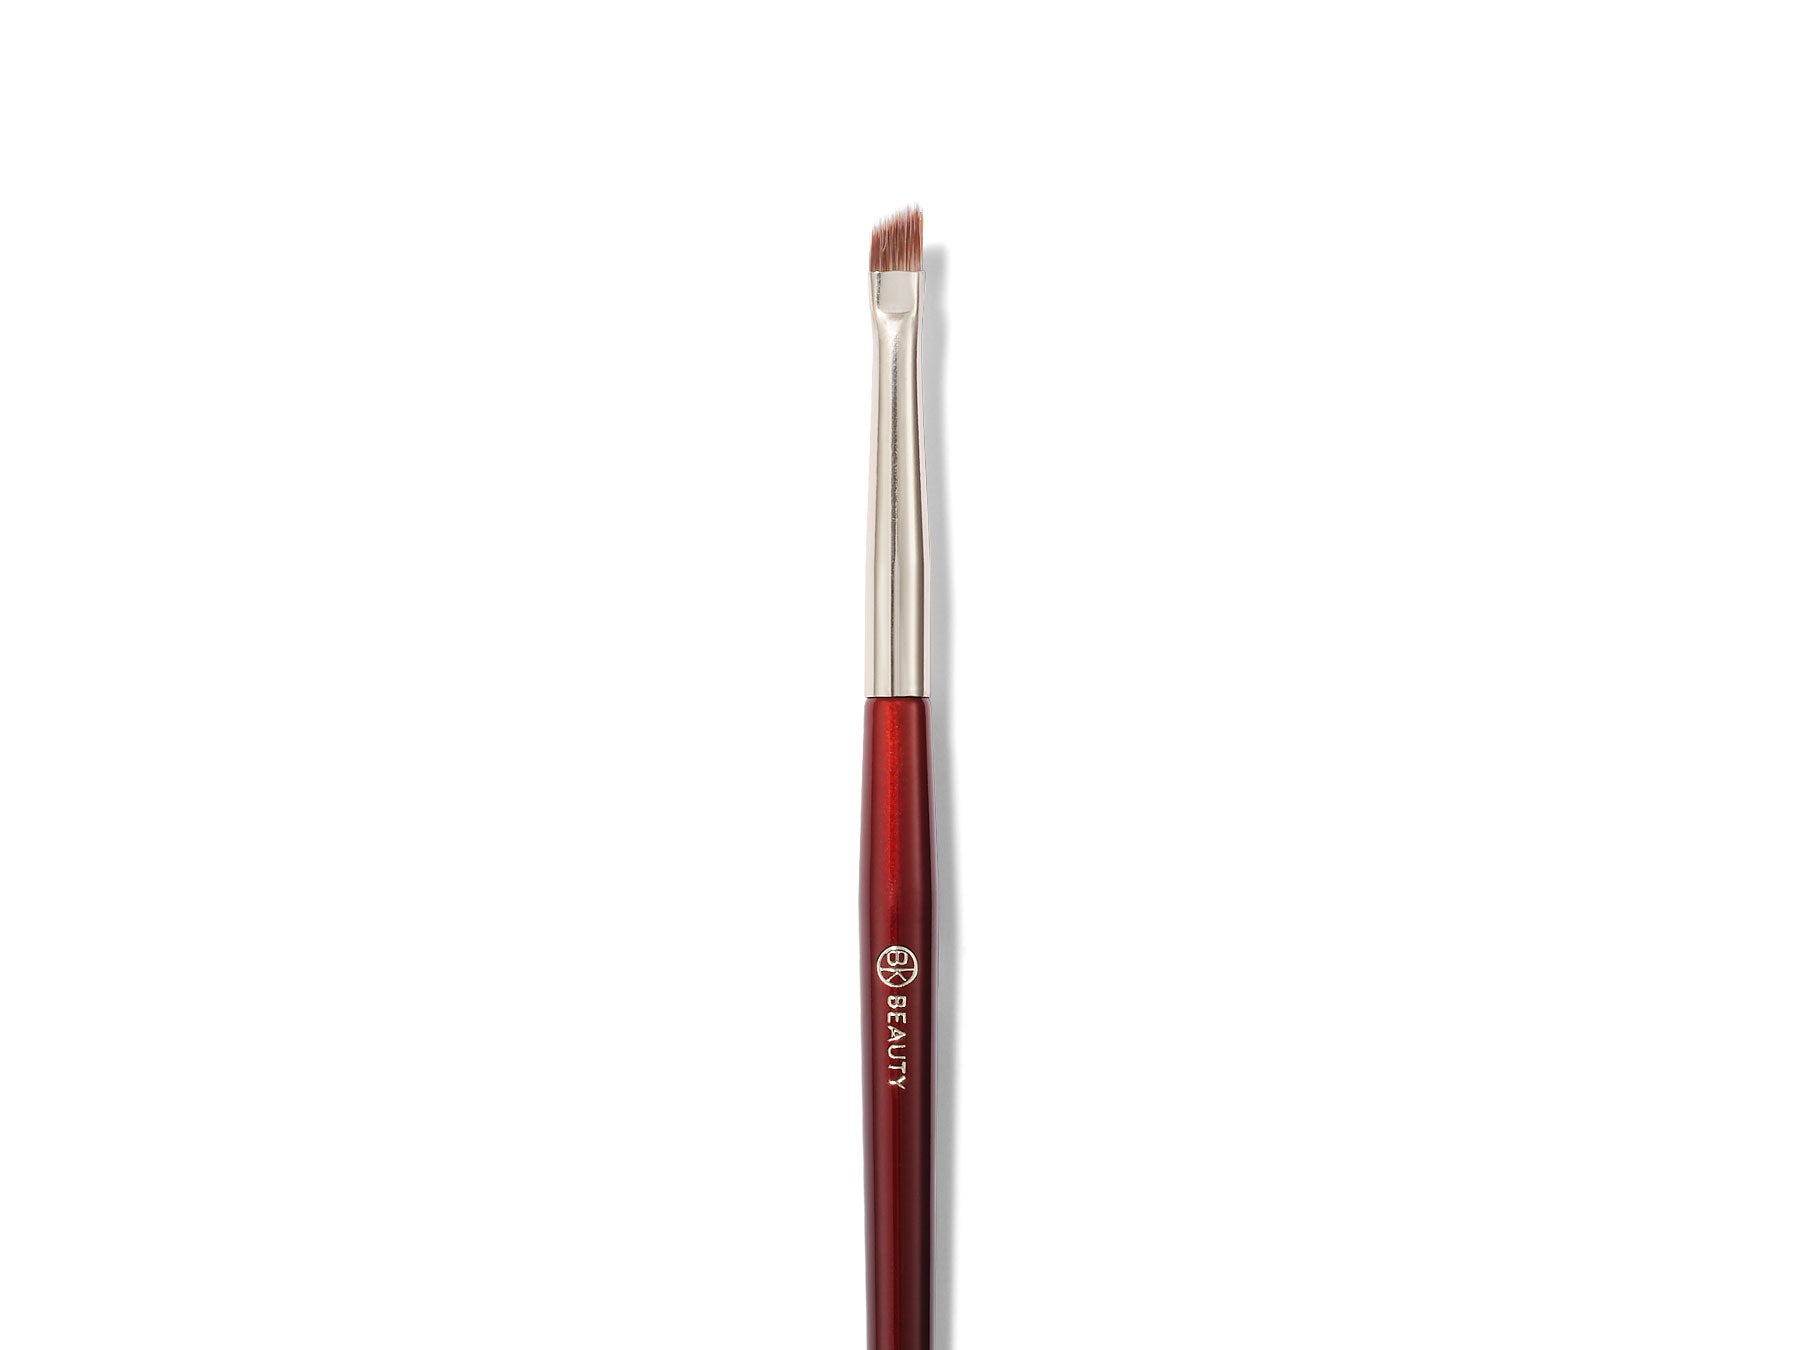 208 Precision Angled Brush by BK Beauty